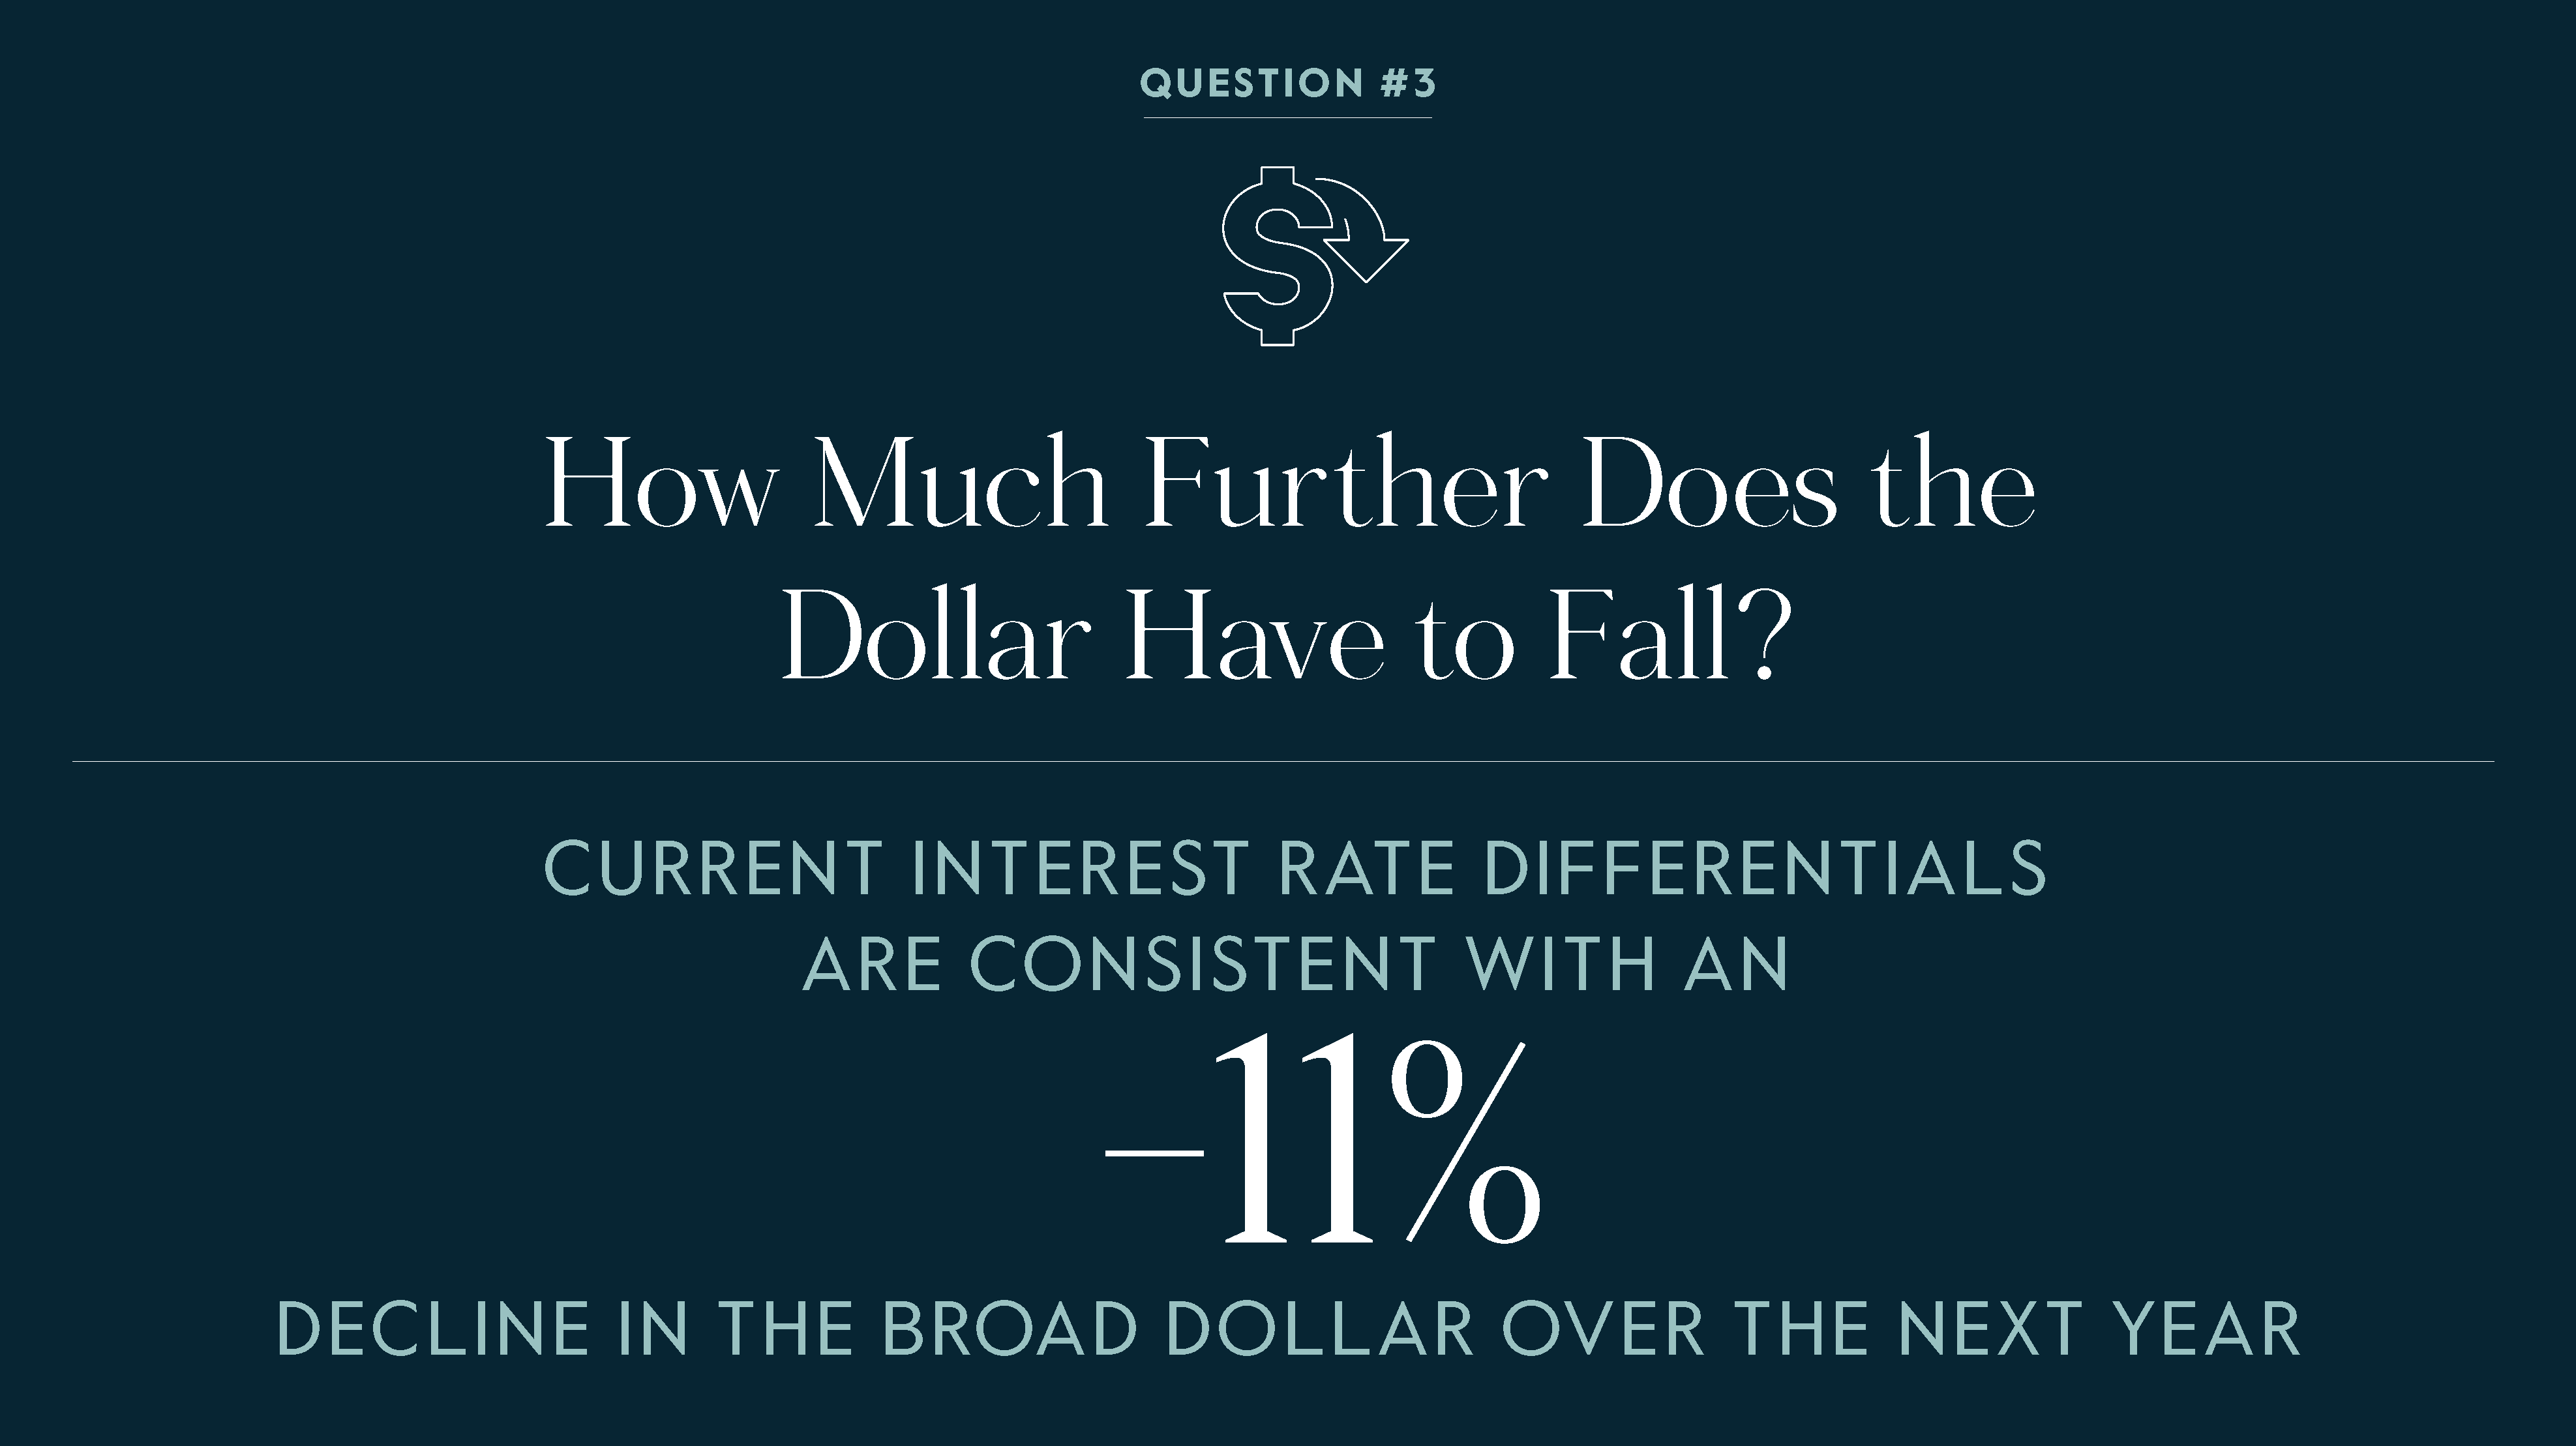 How much further does the dollar have to fall?